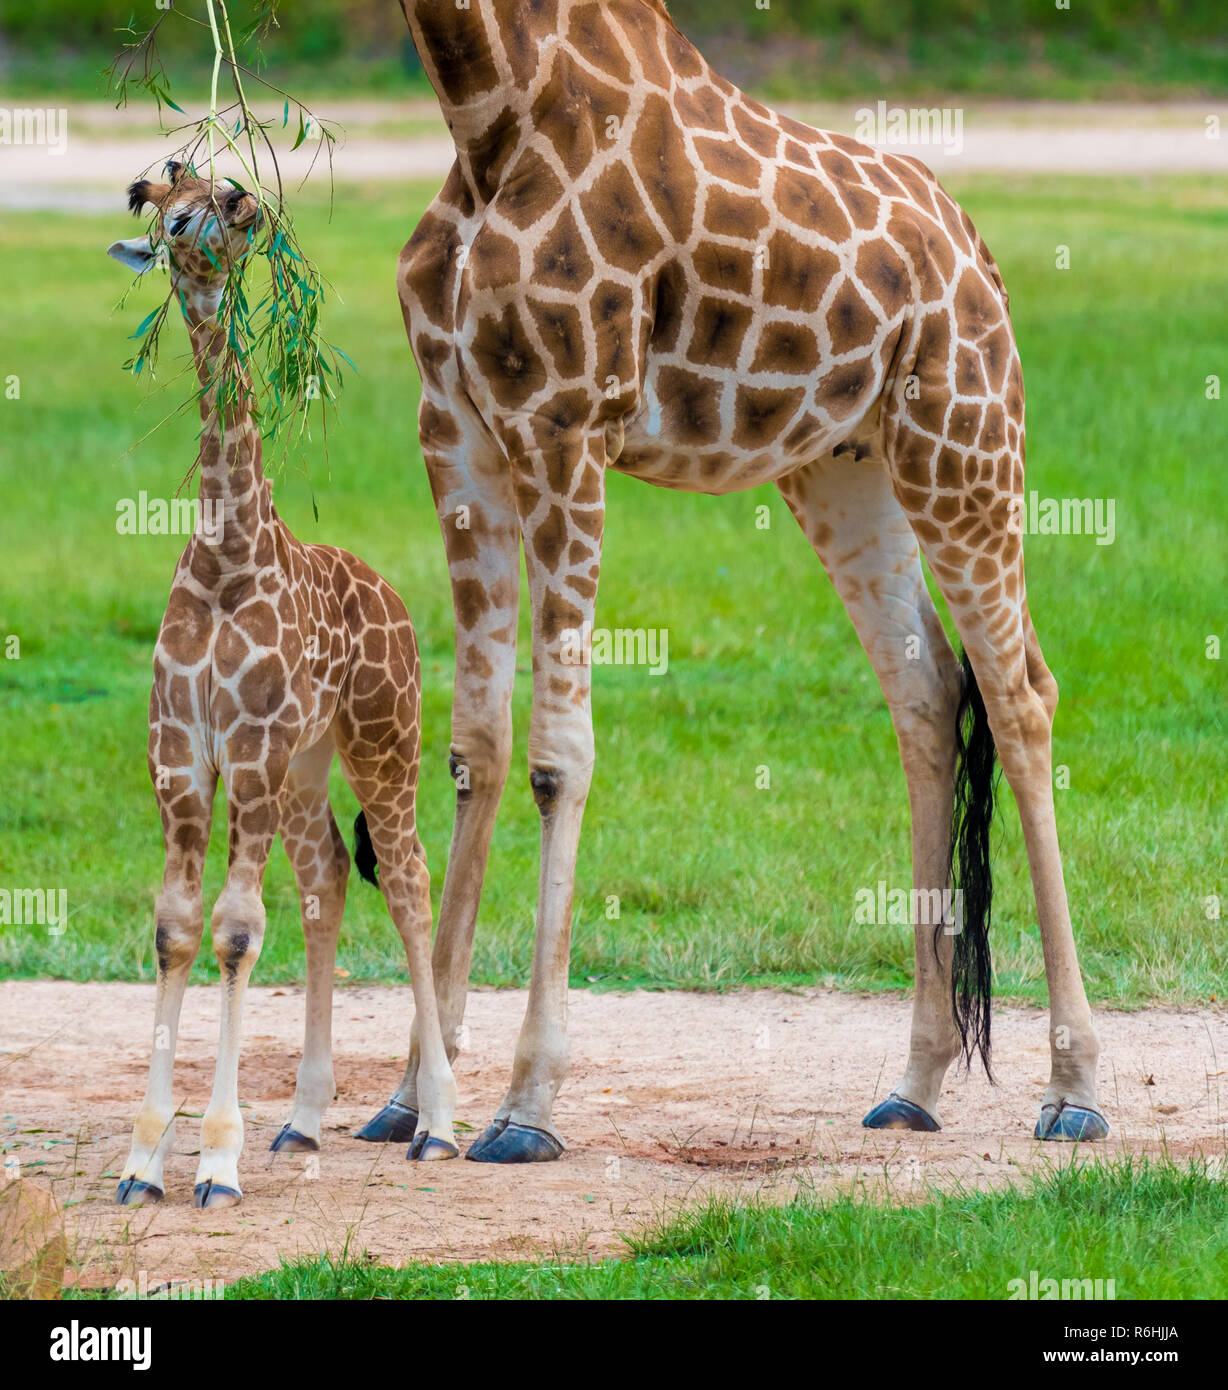 Young baby giraffe with its mother, African native animals Stock Photo